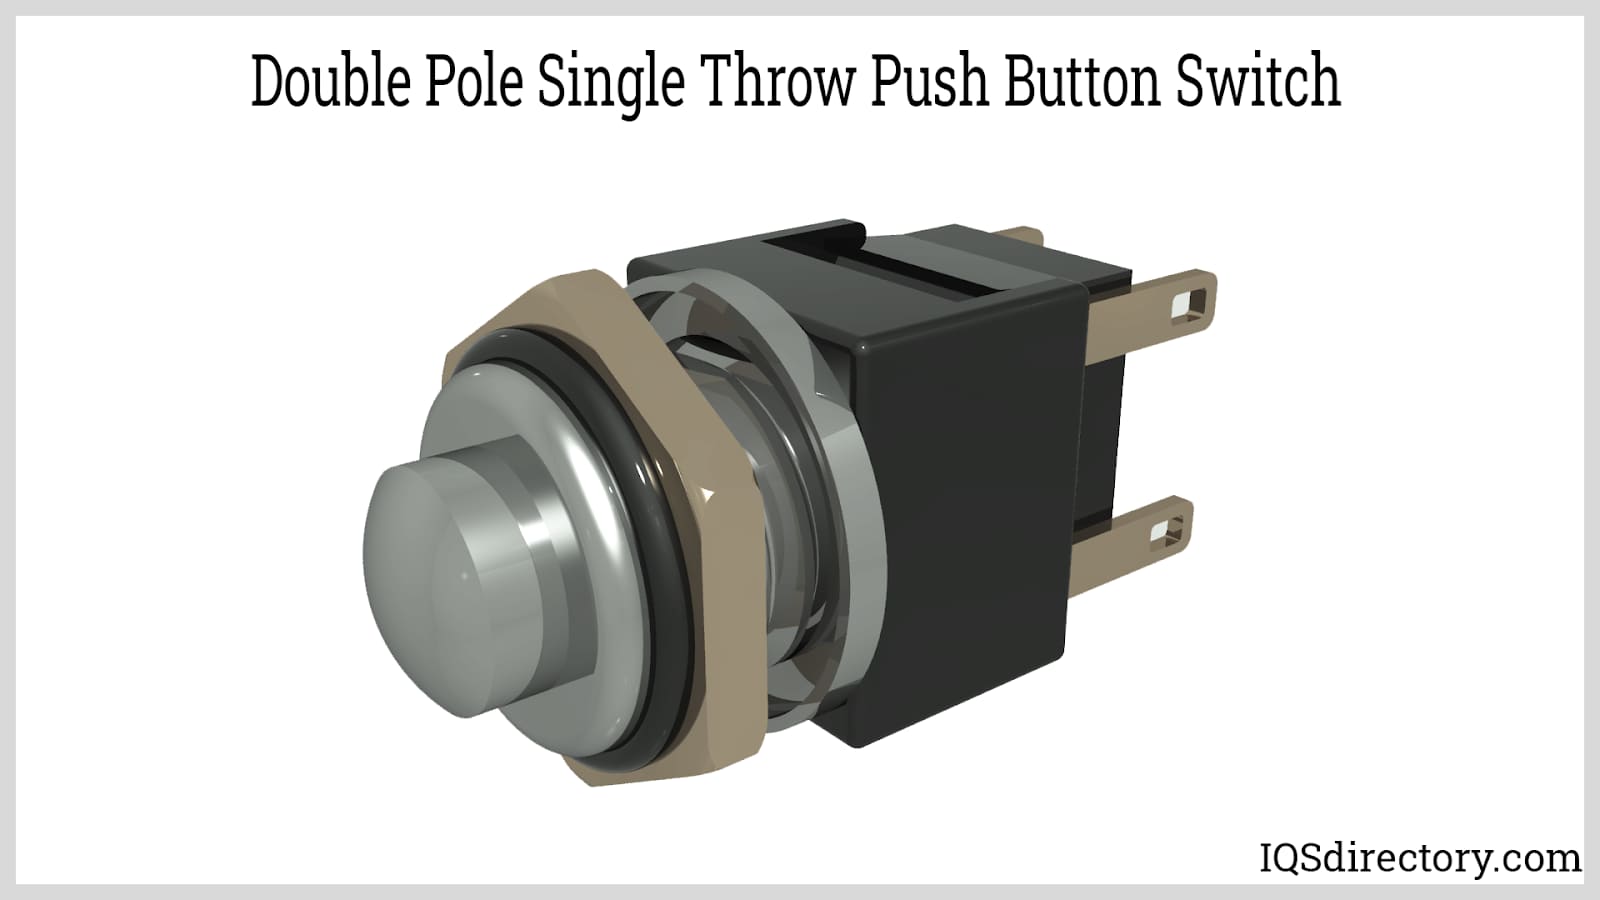 Double Pole Single Throw Push Button Switch